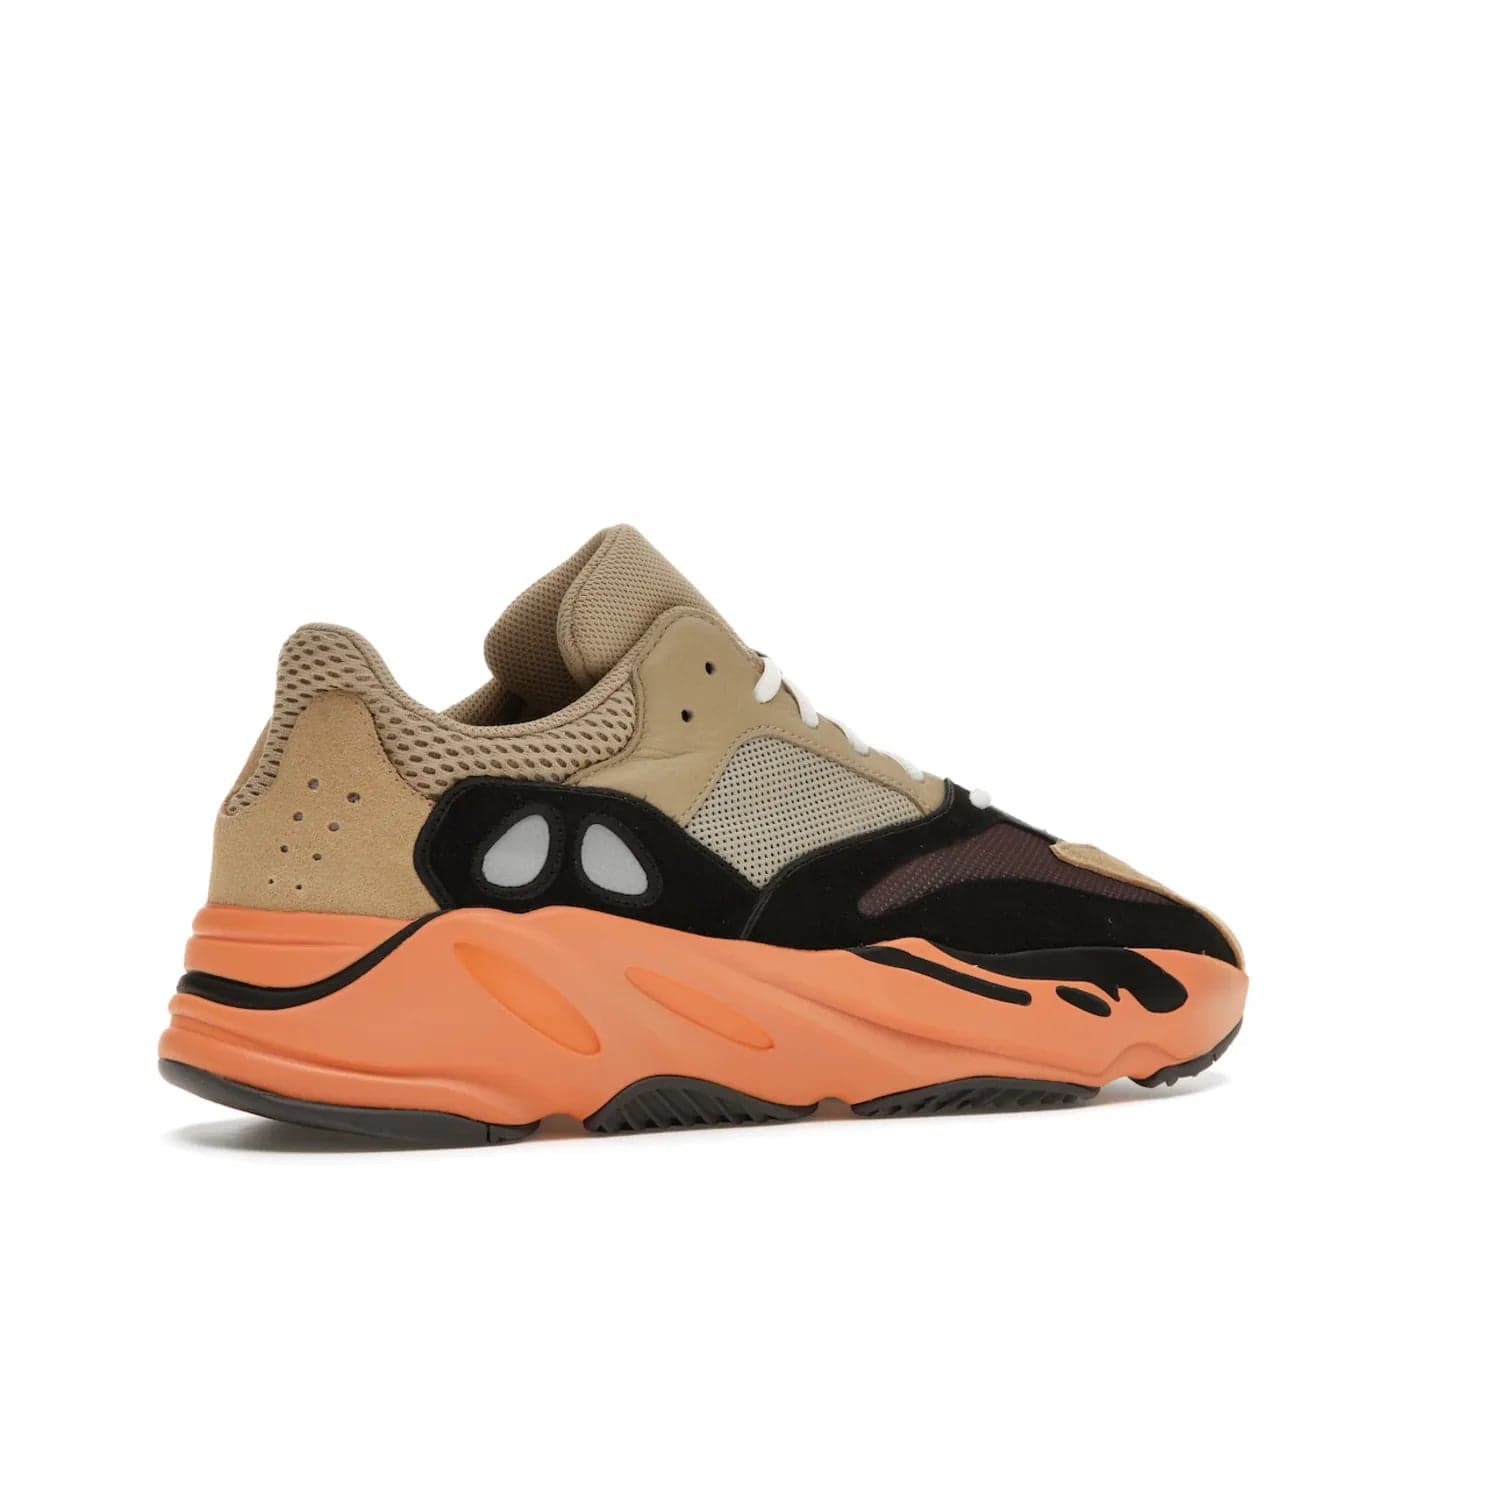 adidas Yeezy Boost 700 Enflame Amber - Image 34 - Only at www.BallersClubKickz.com - Adidas Yeezy Boost 700 Enflame Amber: Eye-catching design with pale yellow, brown, teal, and orange! Get yours in June 2021.